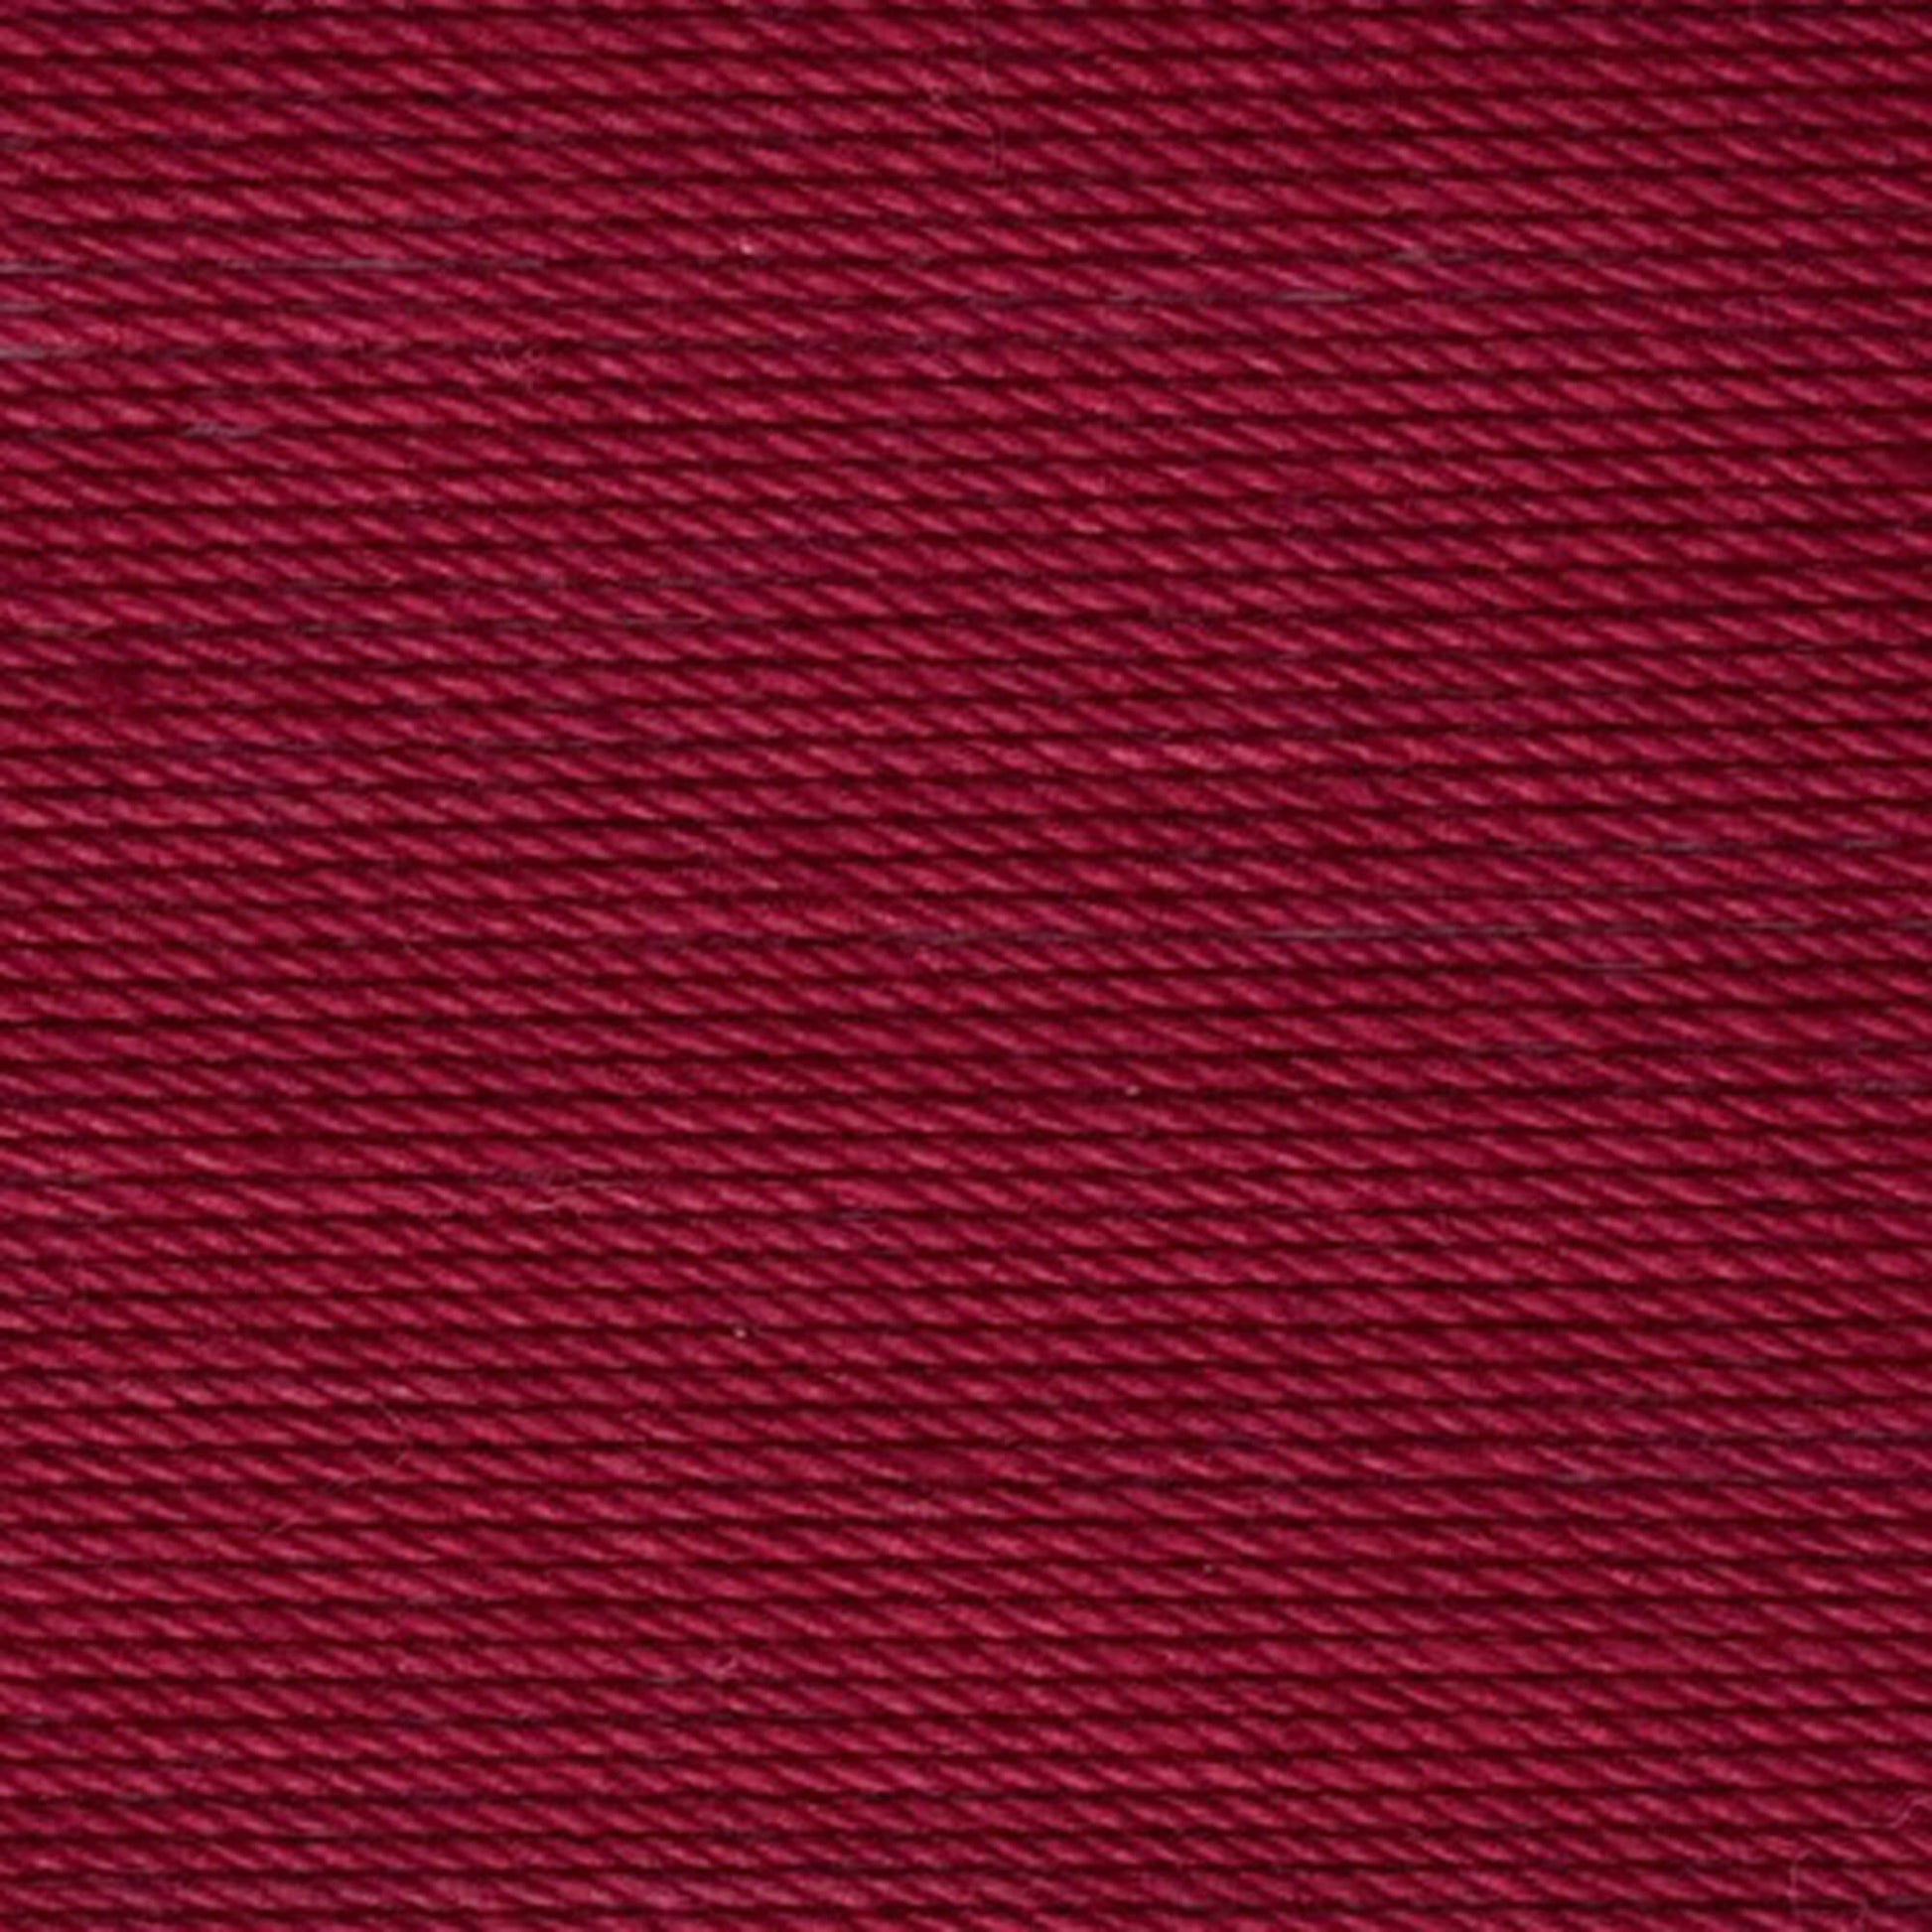 Aunt Lydia's Classic Crochet Thread Size 10 - Clearance shades Victory Red